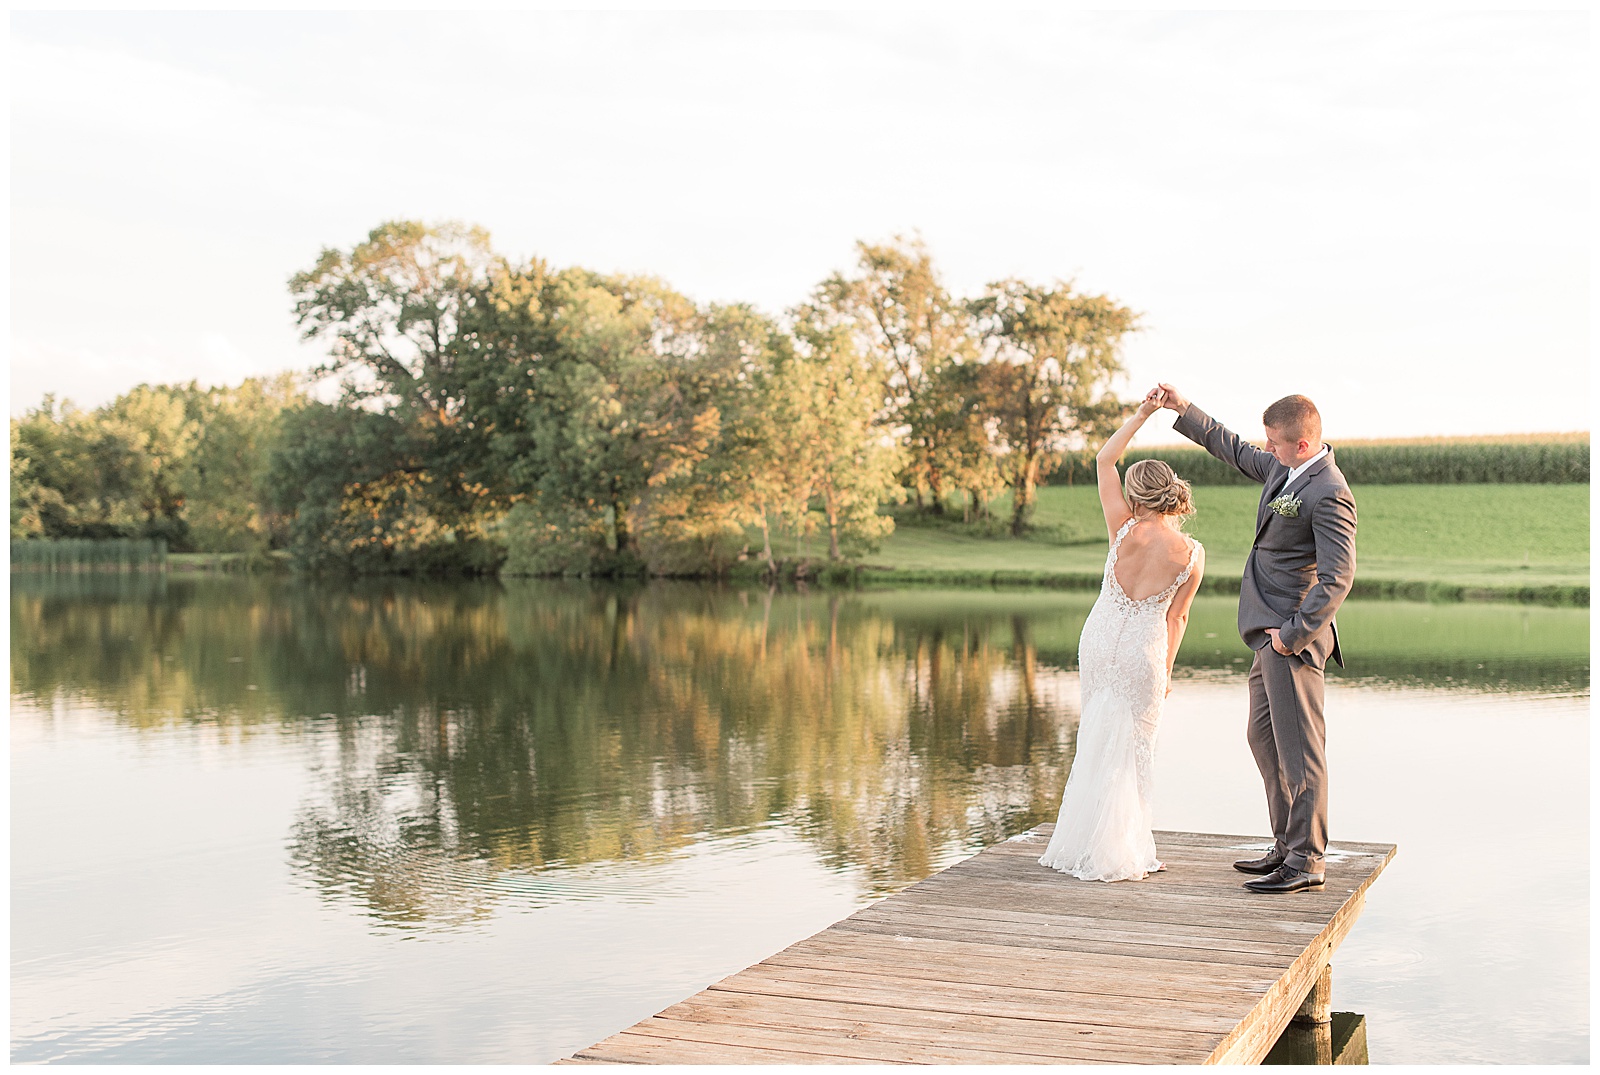 groom twirls his bride on wooden dock by pond on sunny wedding day at lakefield weddings in manheim pennsylvania